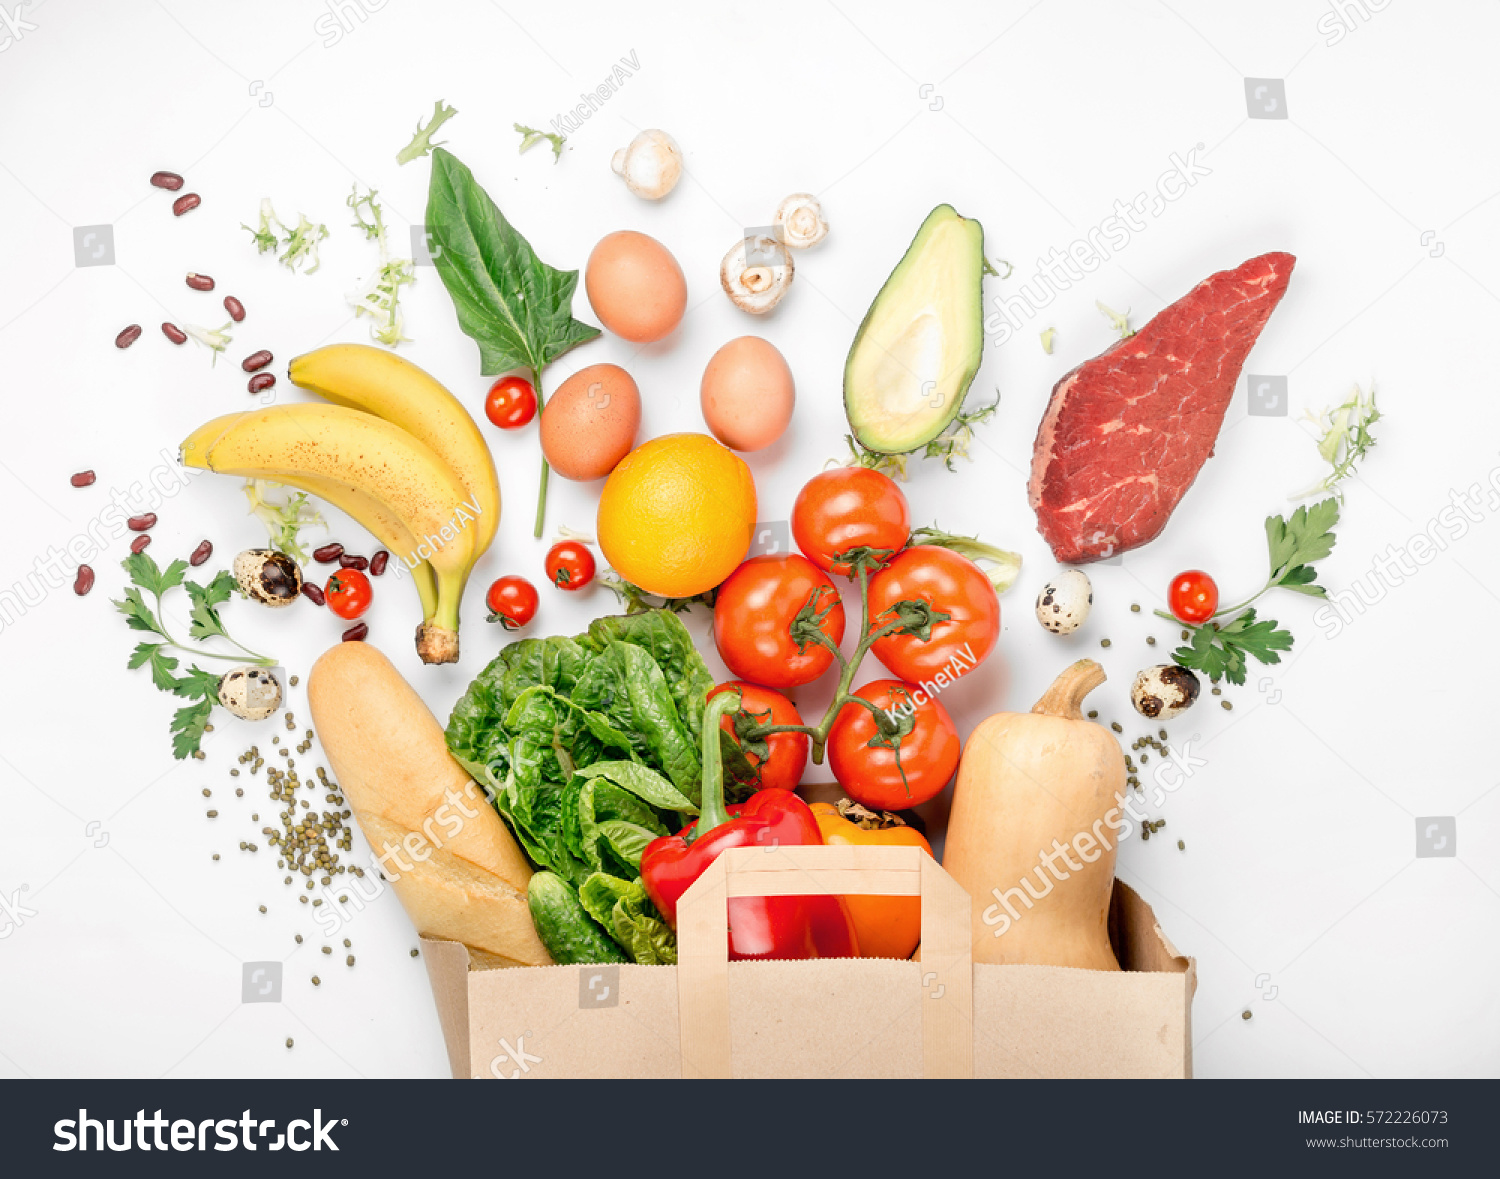 Full paper bag of different health food on a white background. Top view. Flat lay #572226073